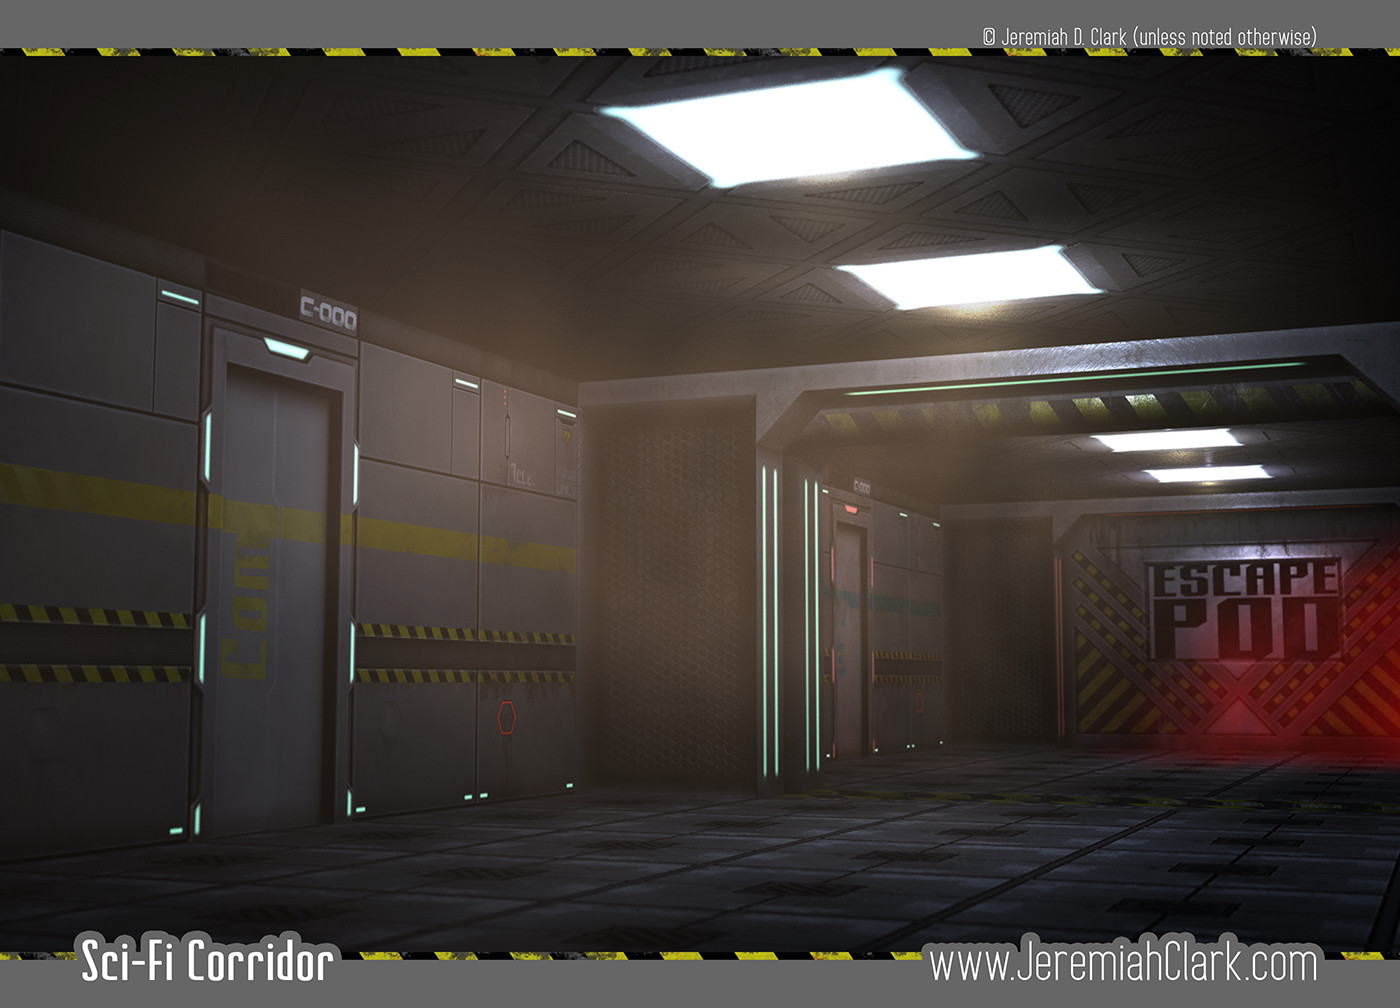 Sci-Fi Corridor full render.
Modeled and rendered in Modo.
Textured using Photoshop and nDo1.